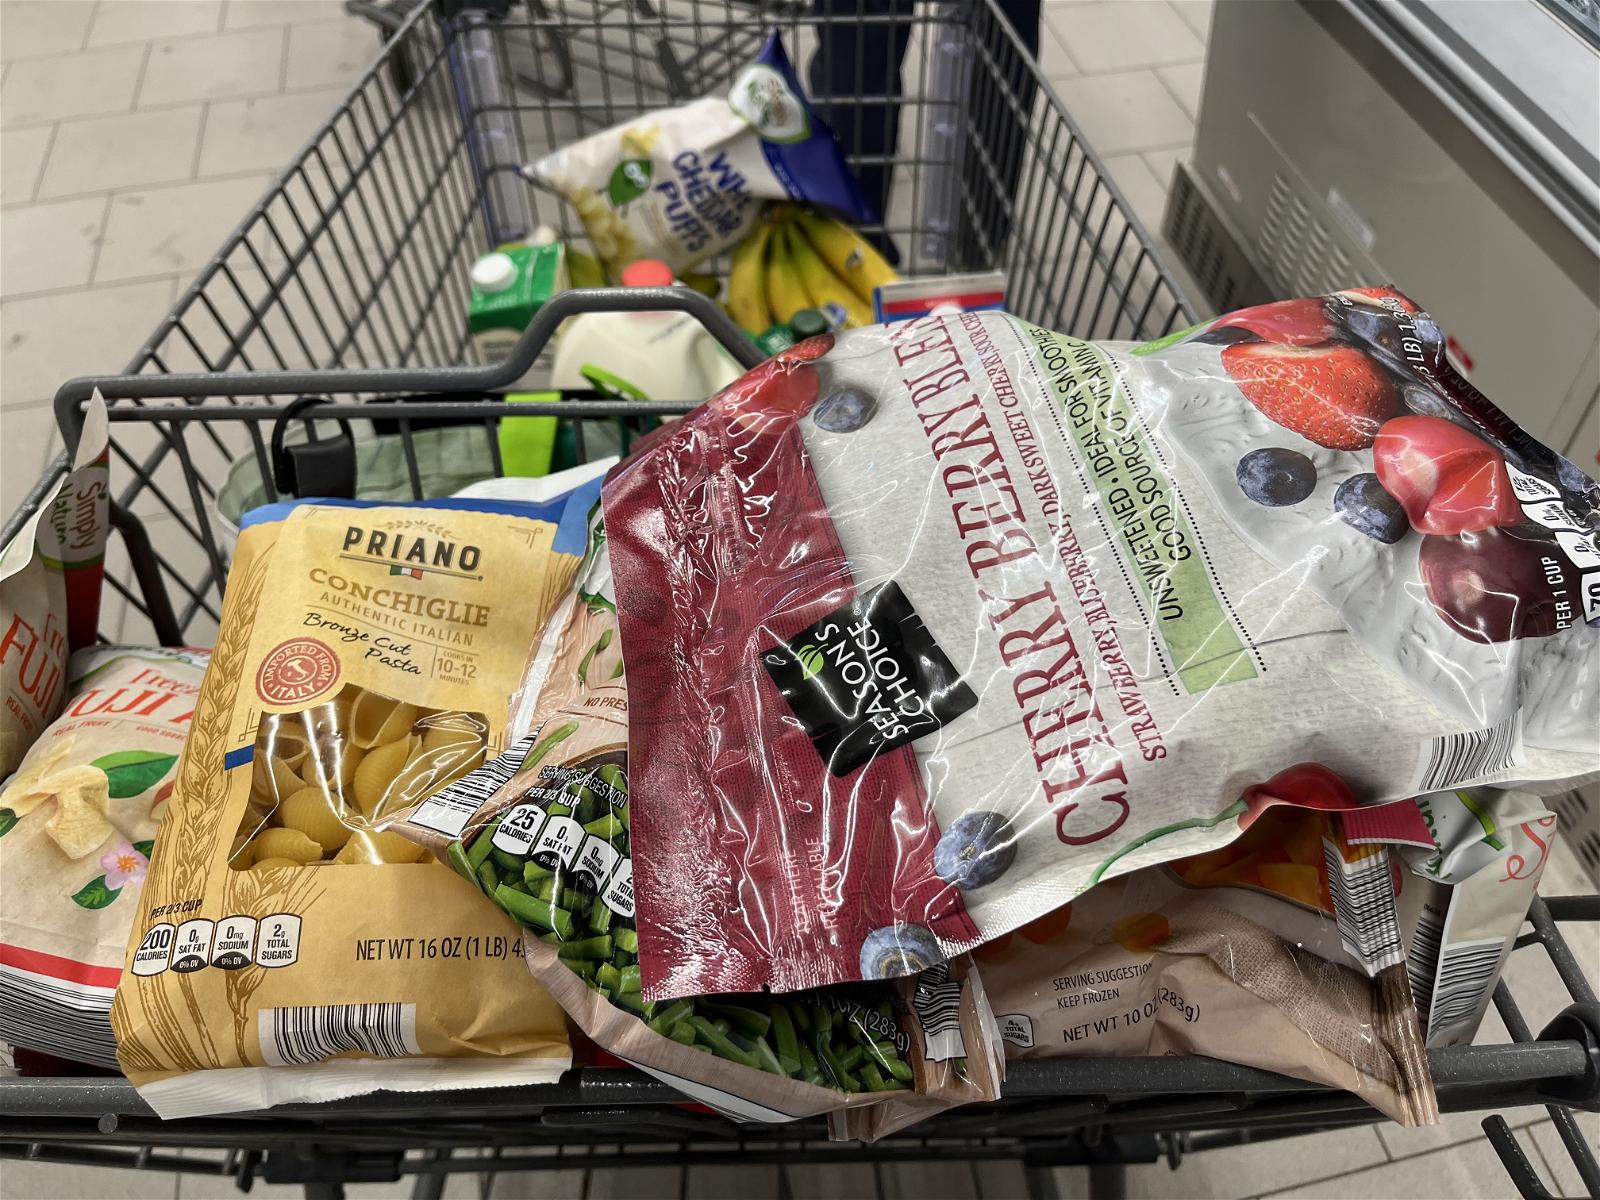 What to expect: shopping experience at Aldi for cheap groceries